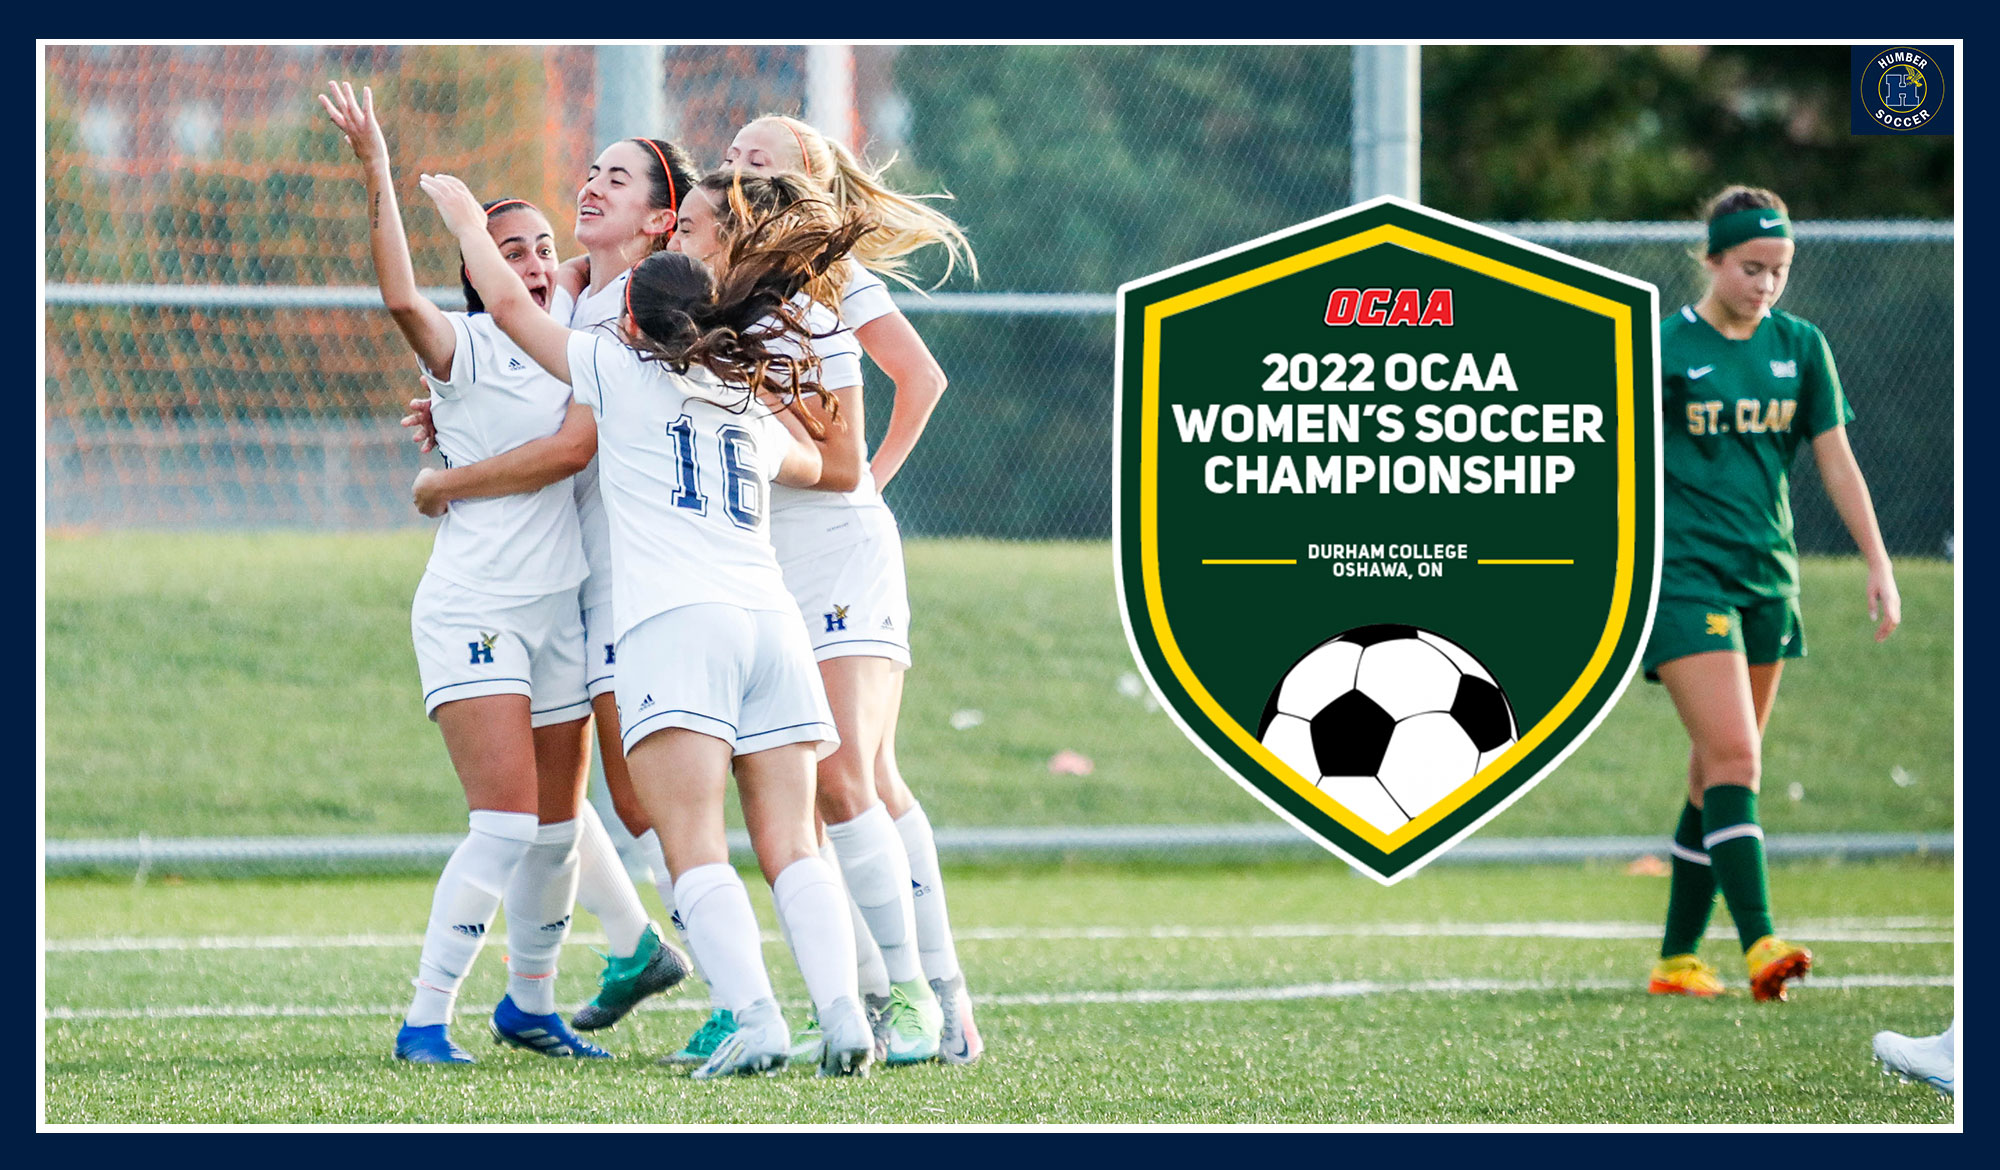 Women's soccer celebrating with the tournament logo